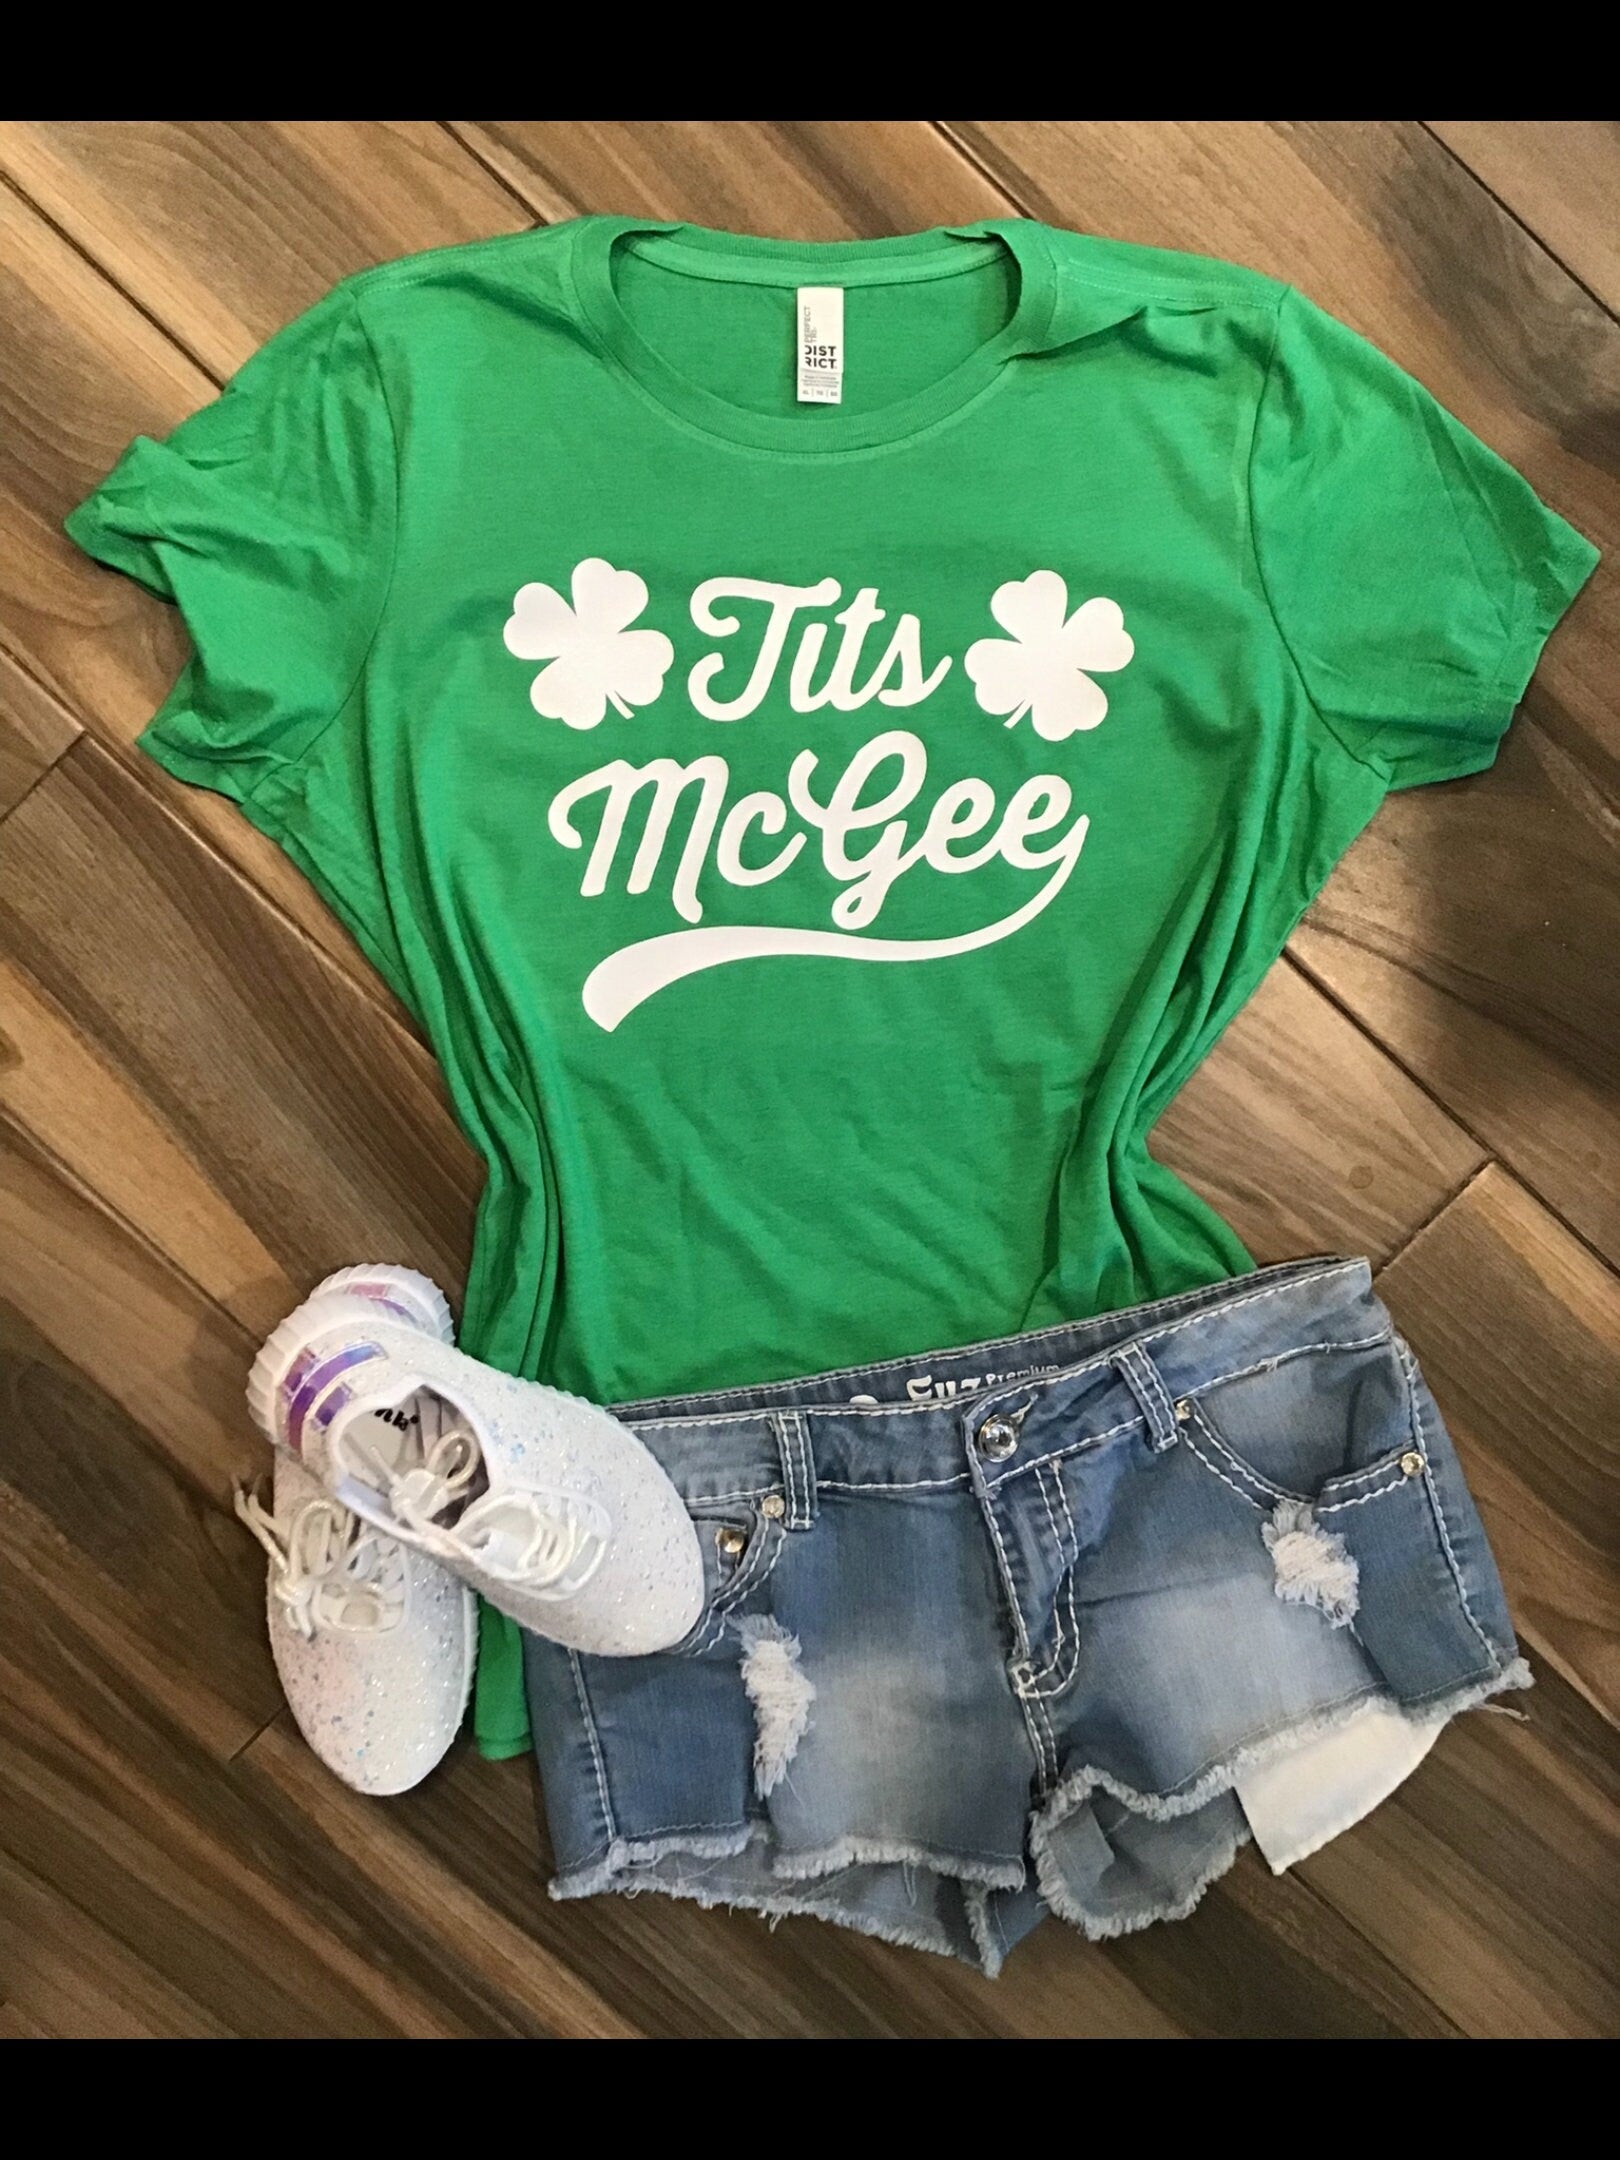 Tits McGee Shirt: Funny St. Patrick's Day Apparel for Women – LuLu